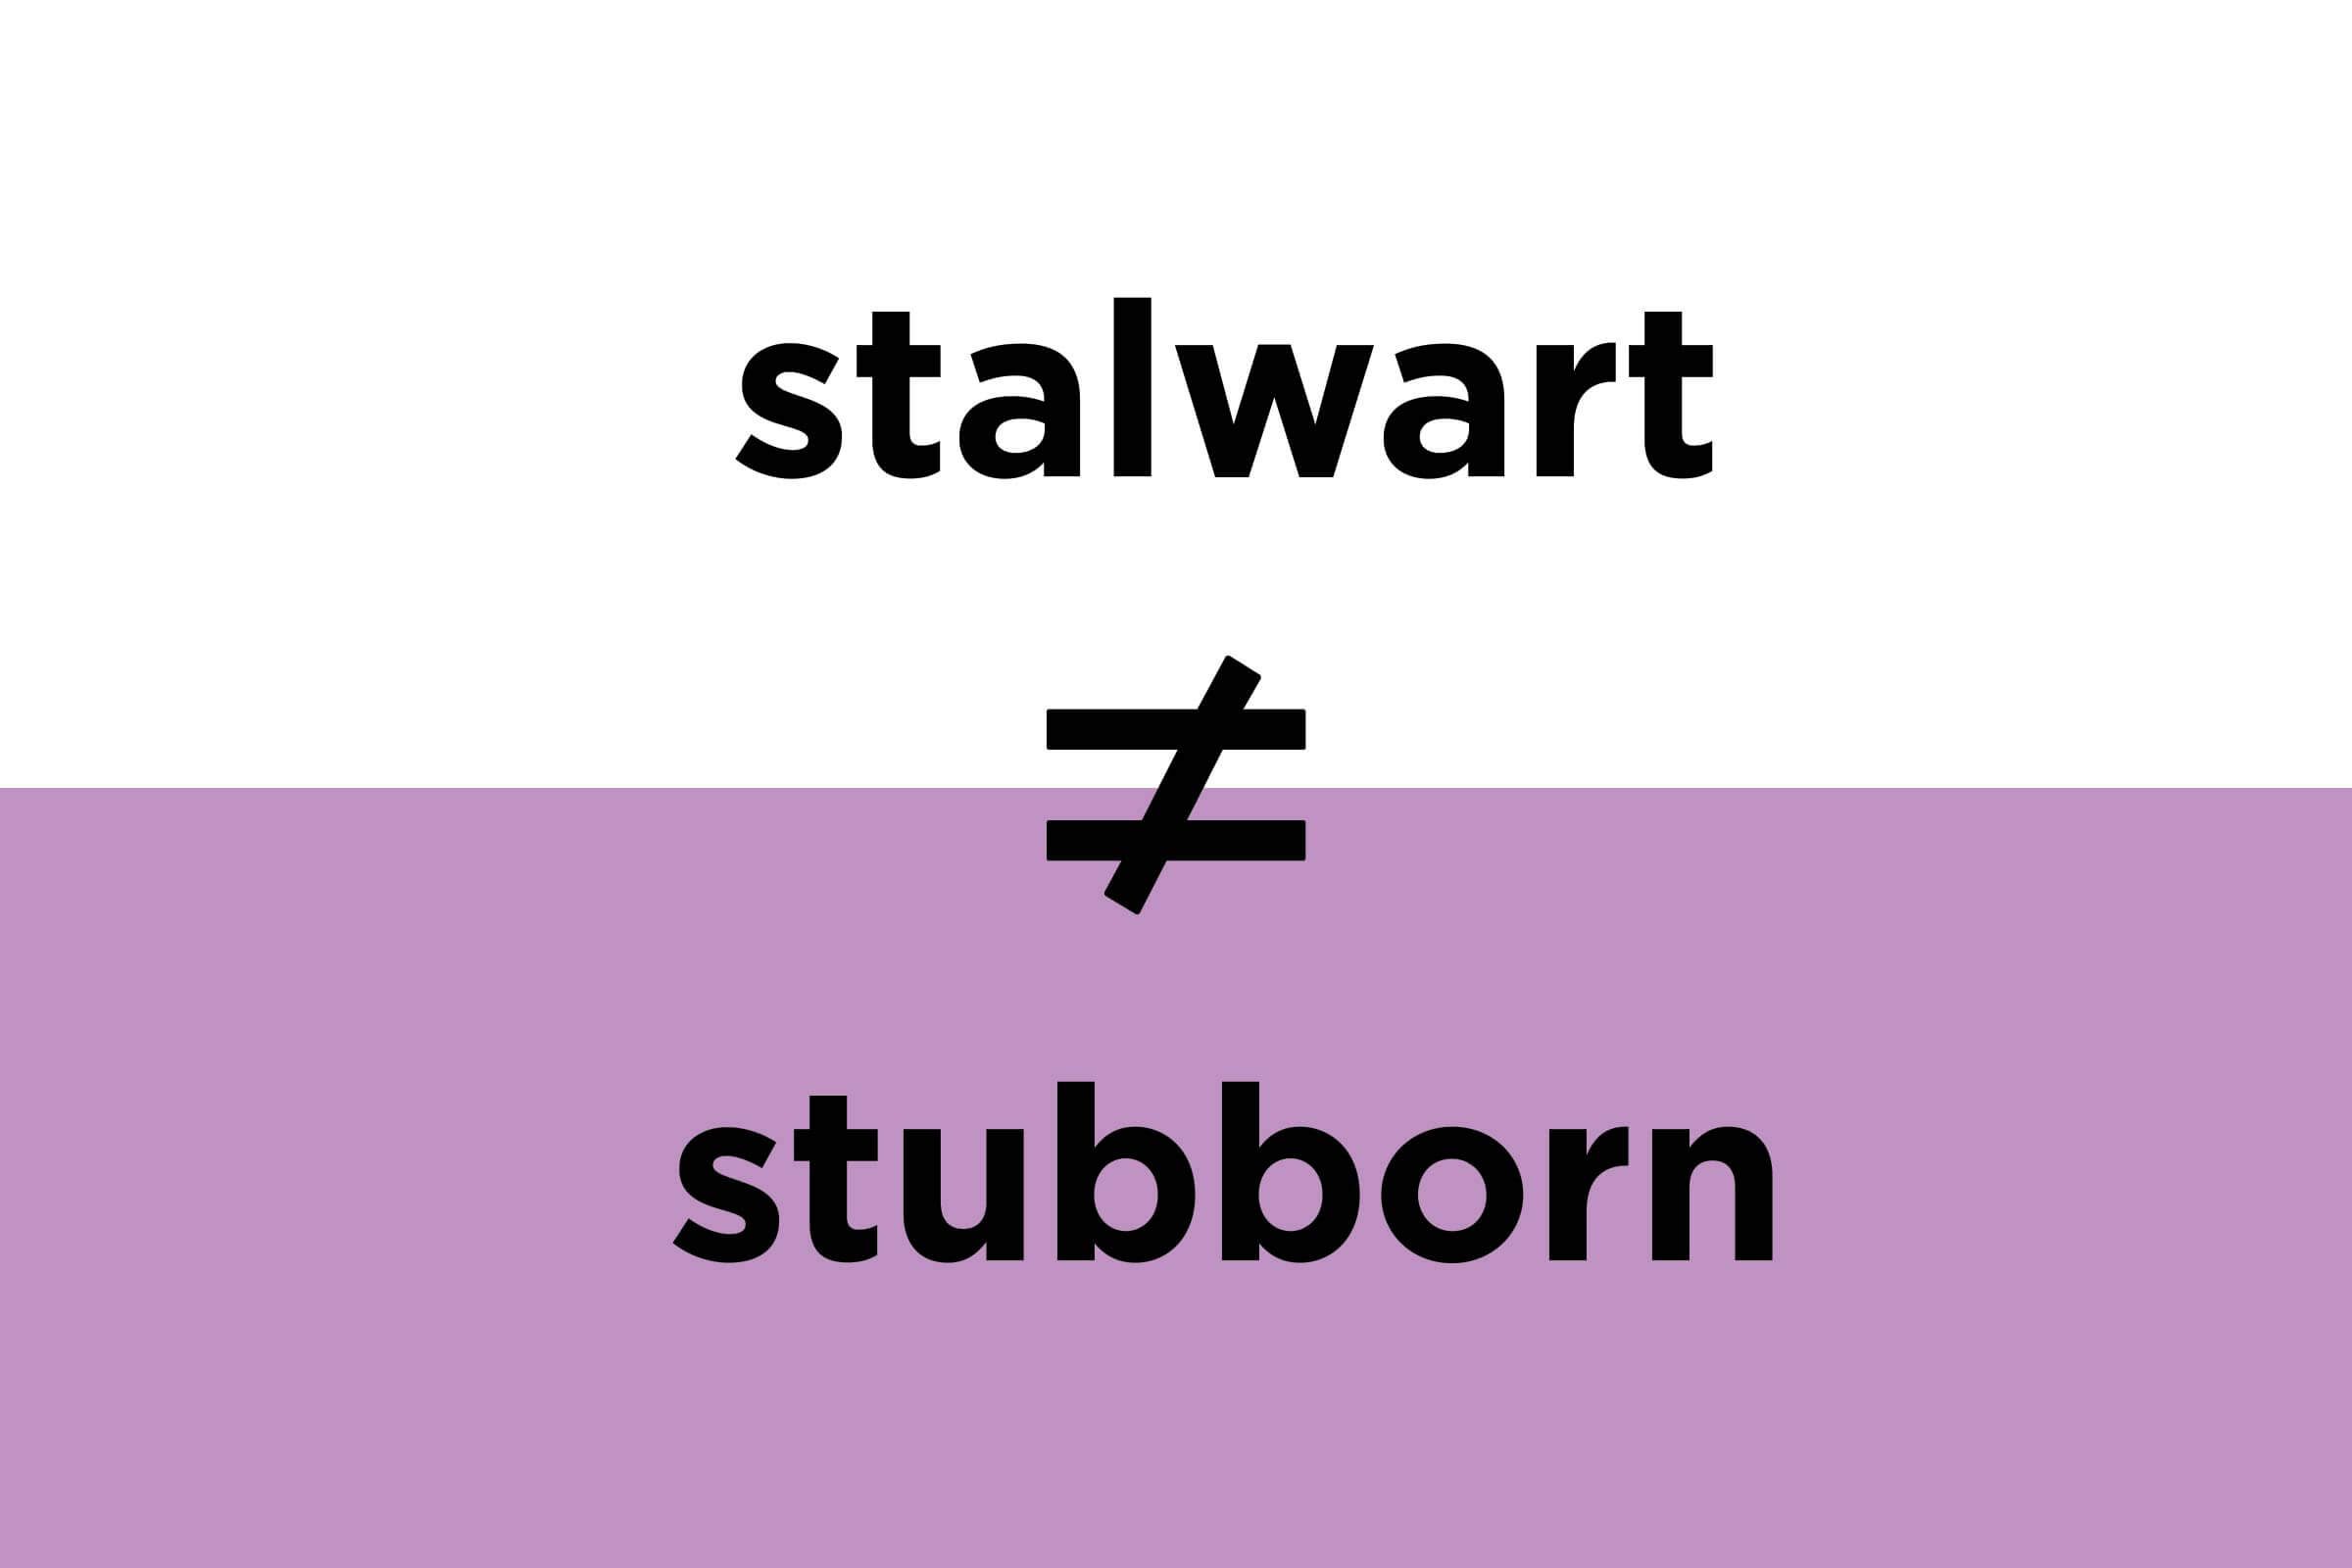 Stubborn - Definition, Meaning & Synonyms